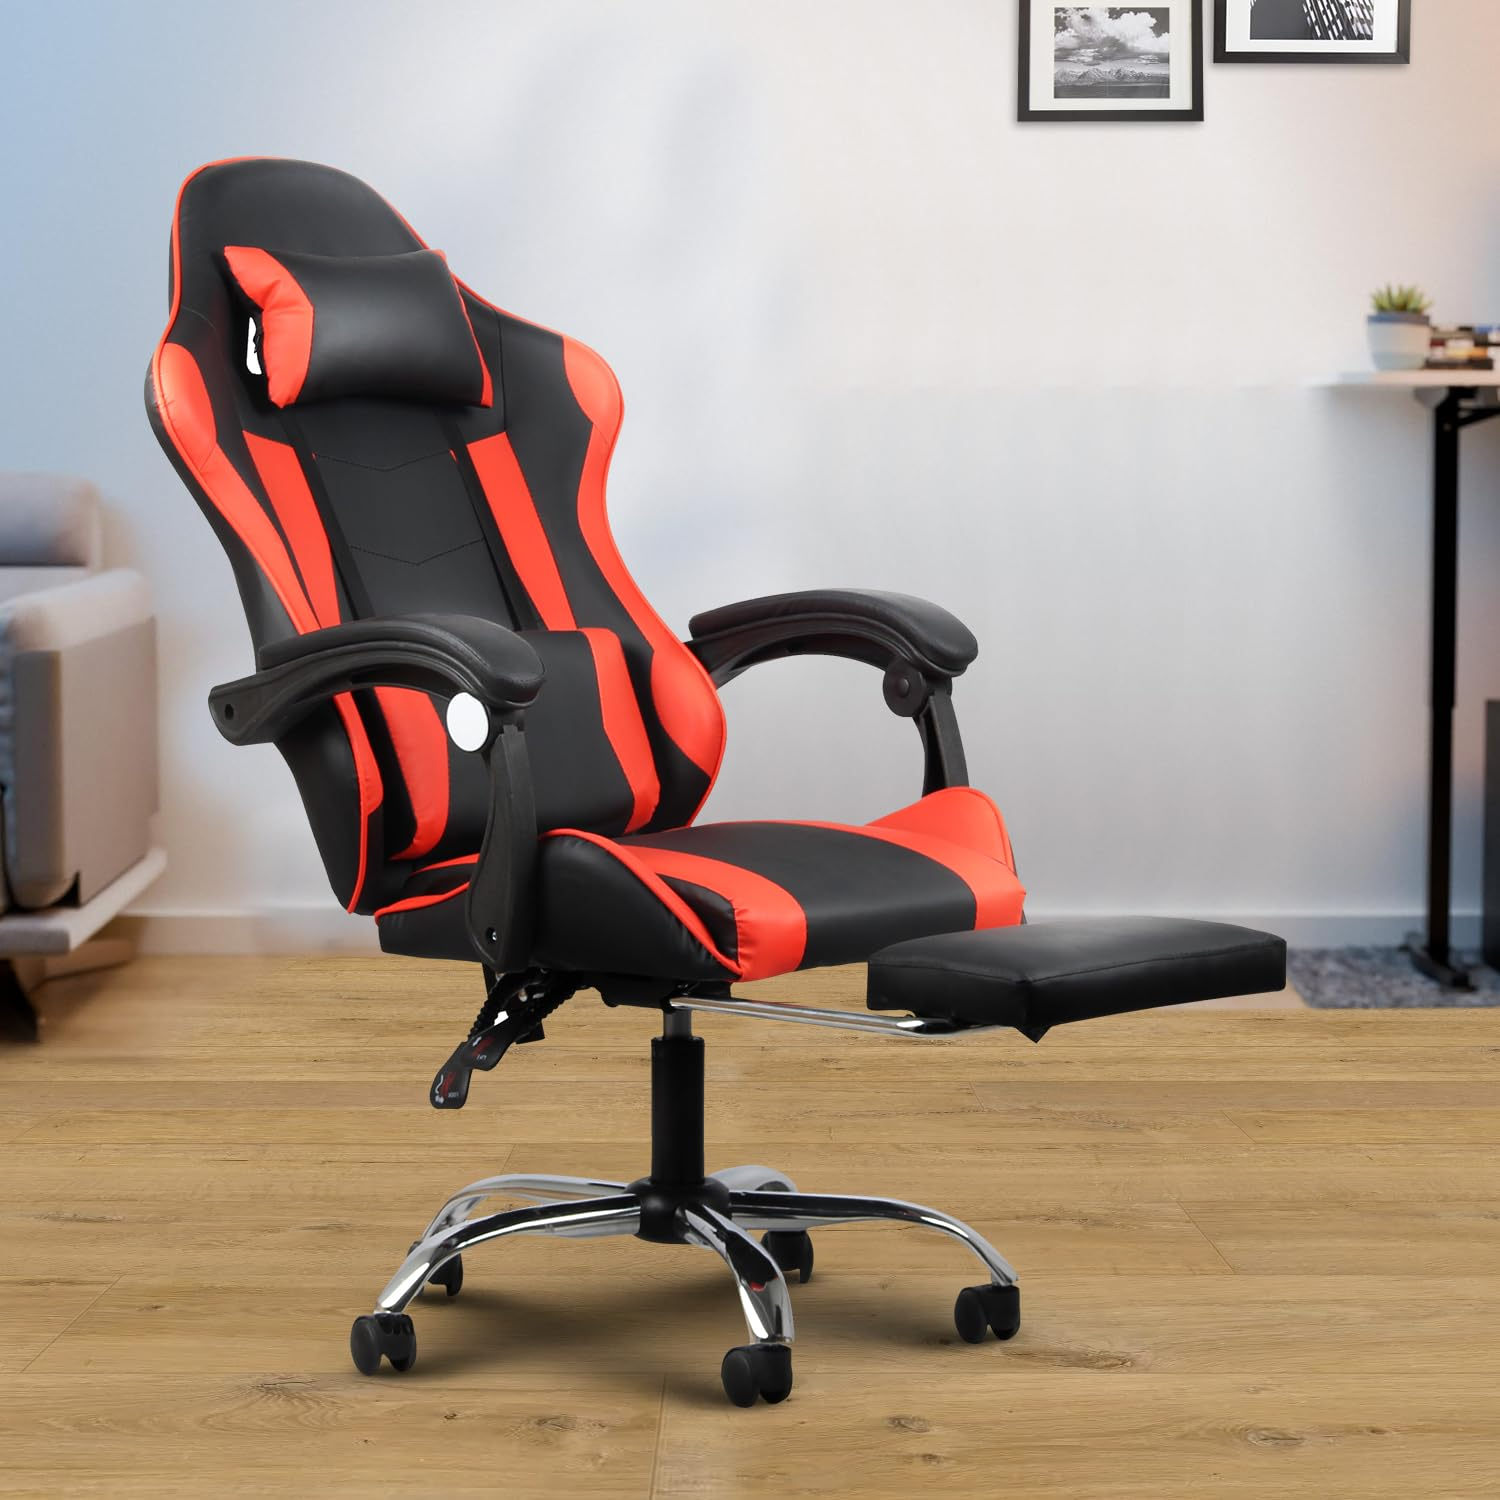 Homeland Design your Heritage Gaming Chair YG-7006 